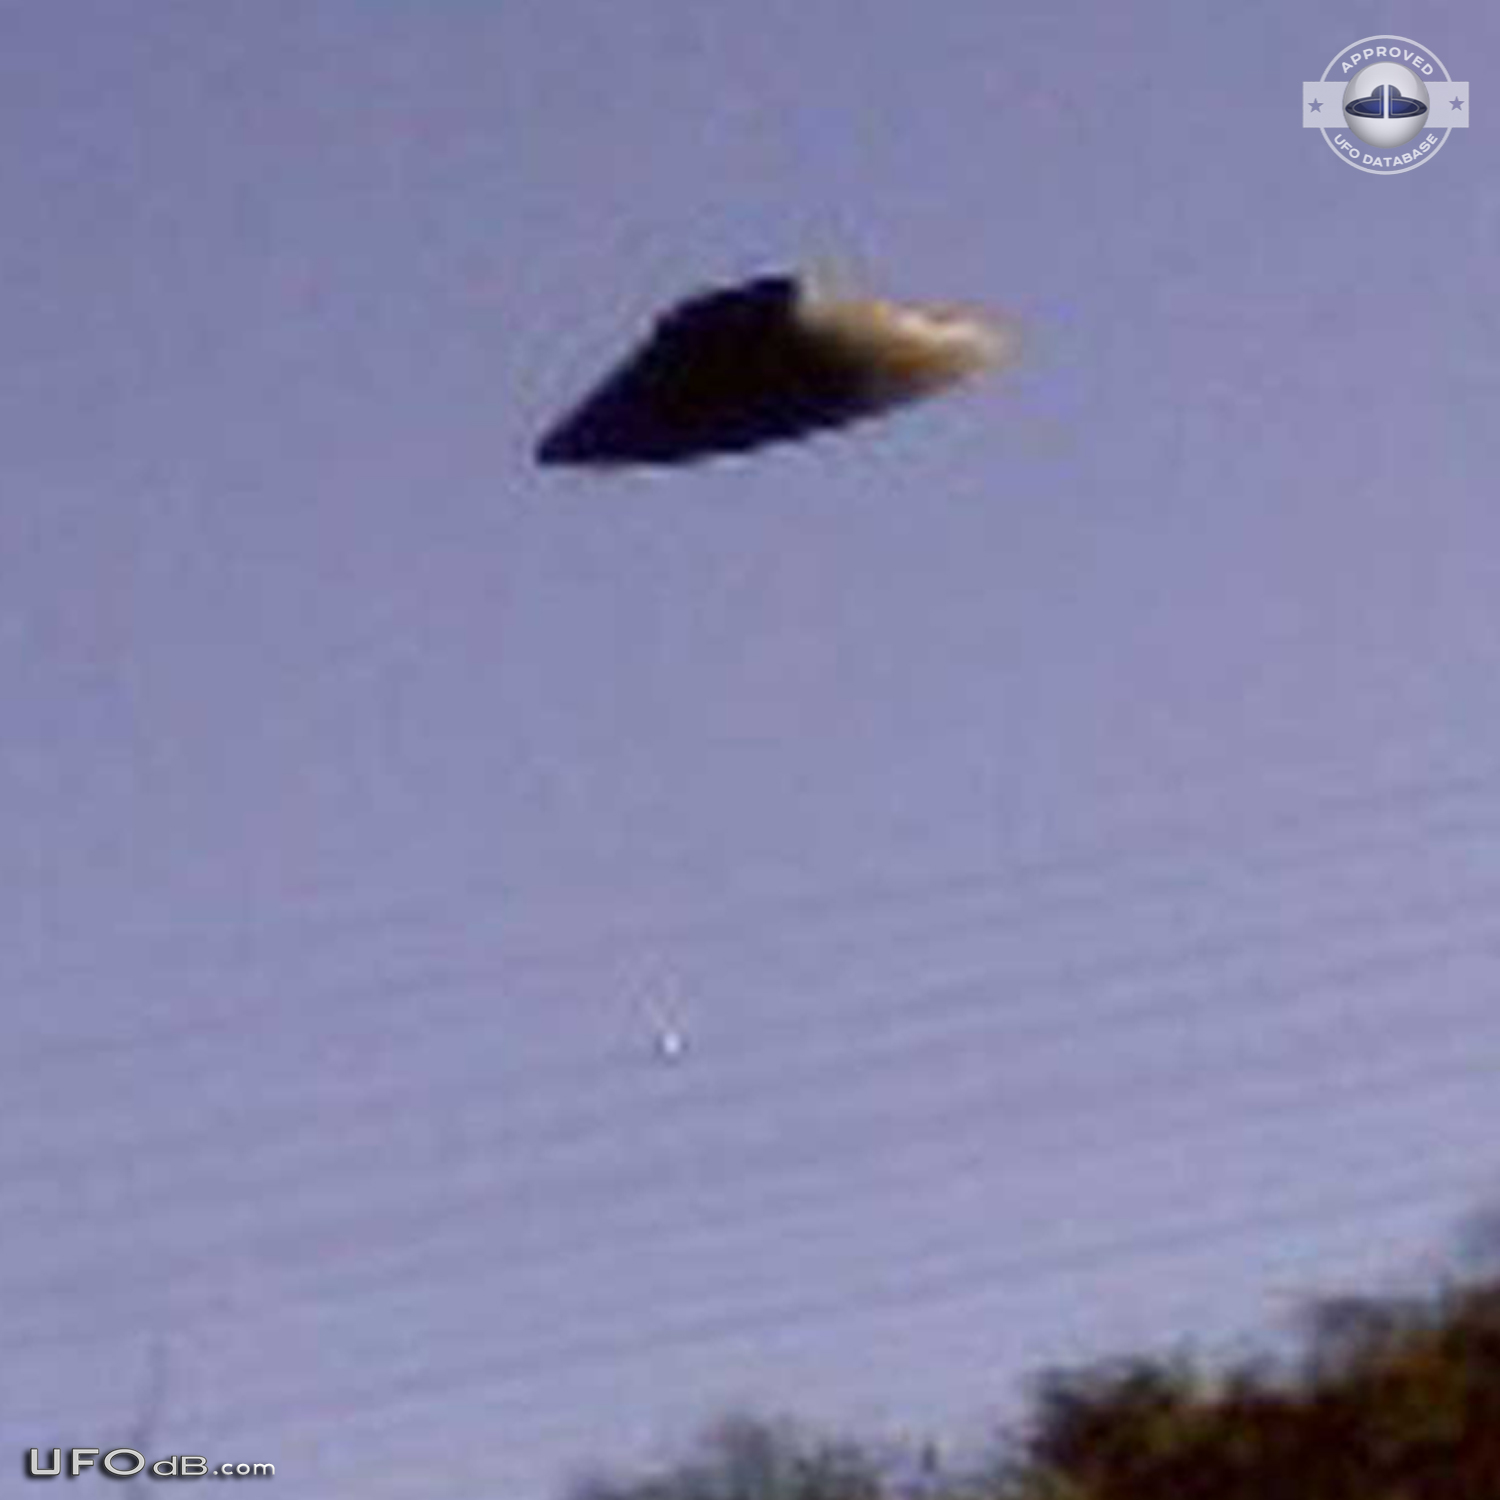 UFO Pictures 2009 UFO over San Diego County California United states. UFO Picture #429-3